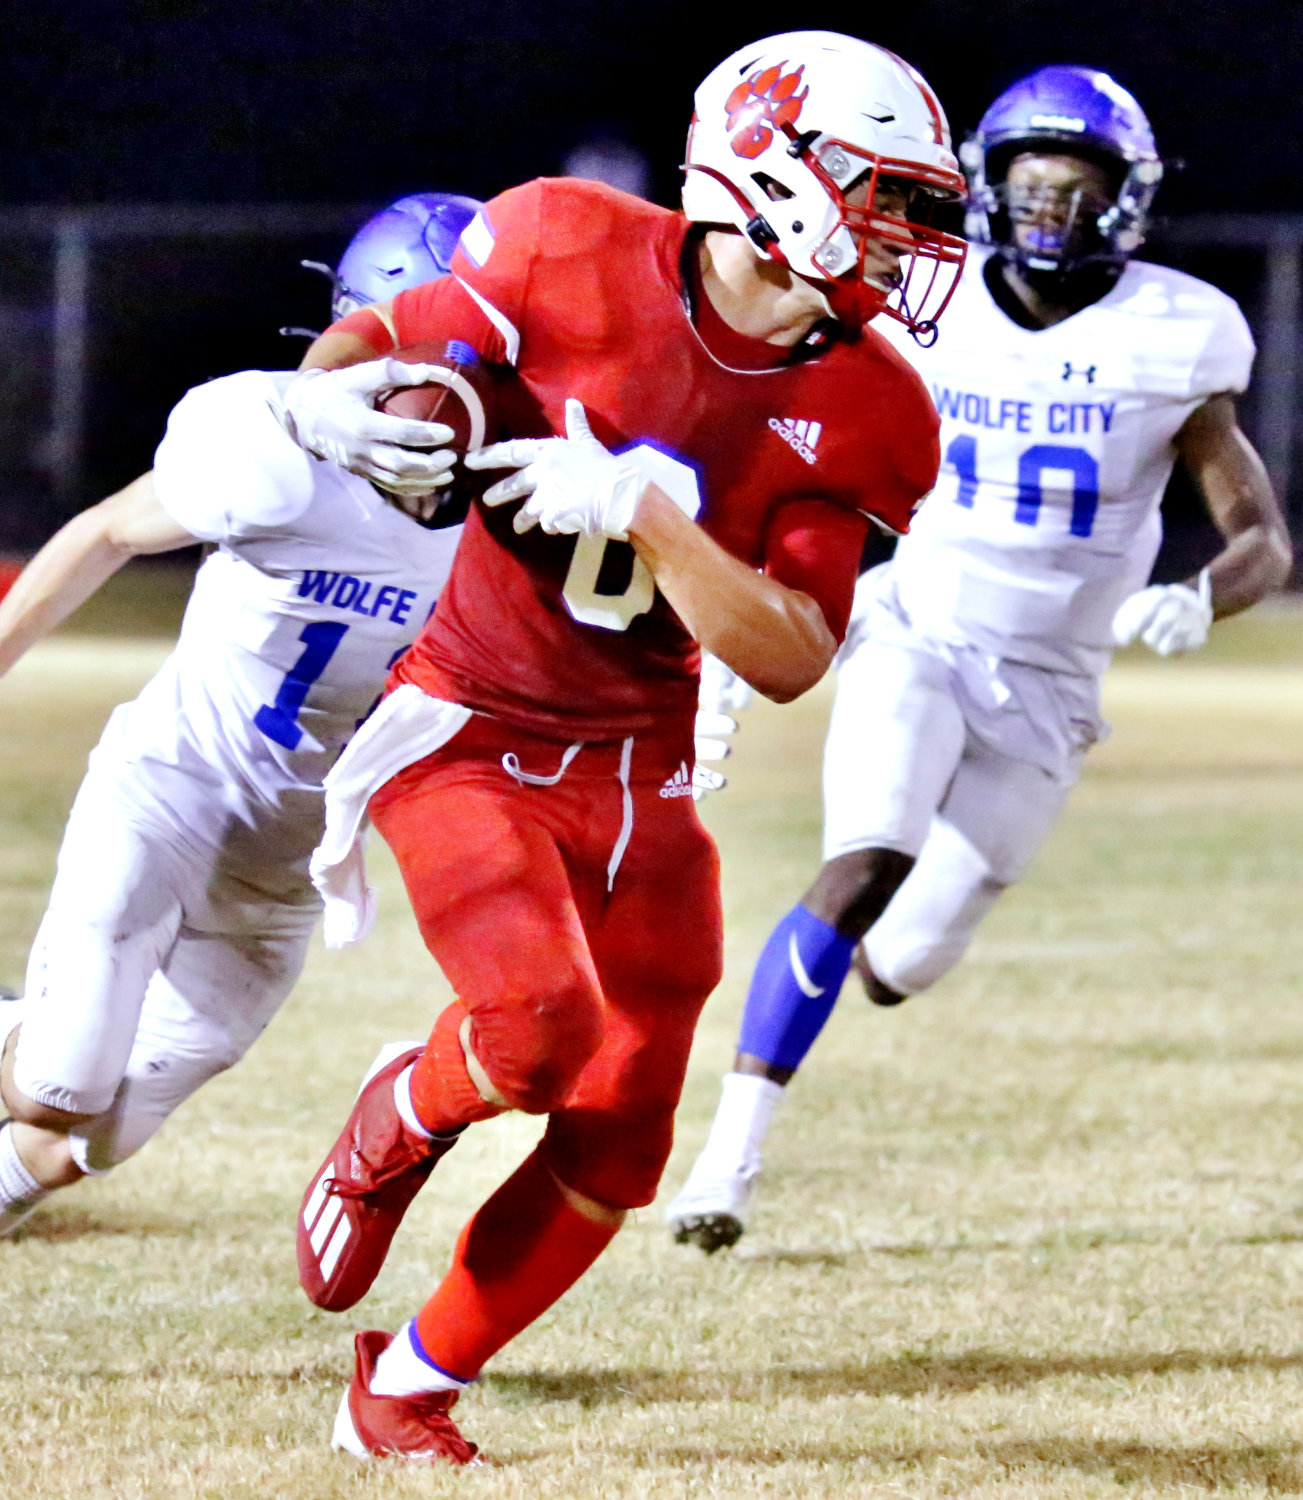 Panther Jerry Skinner had a stand-out game offensively against Wolfe City as well as from his defensive end position.